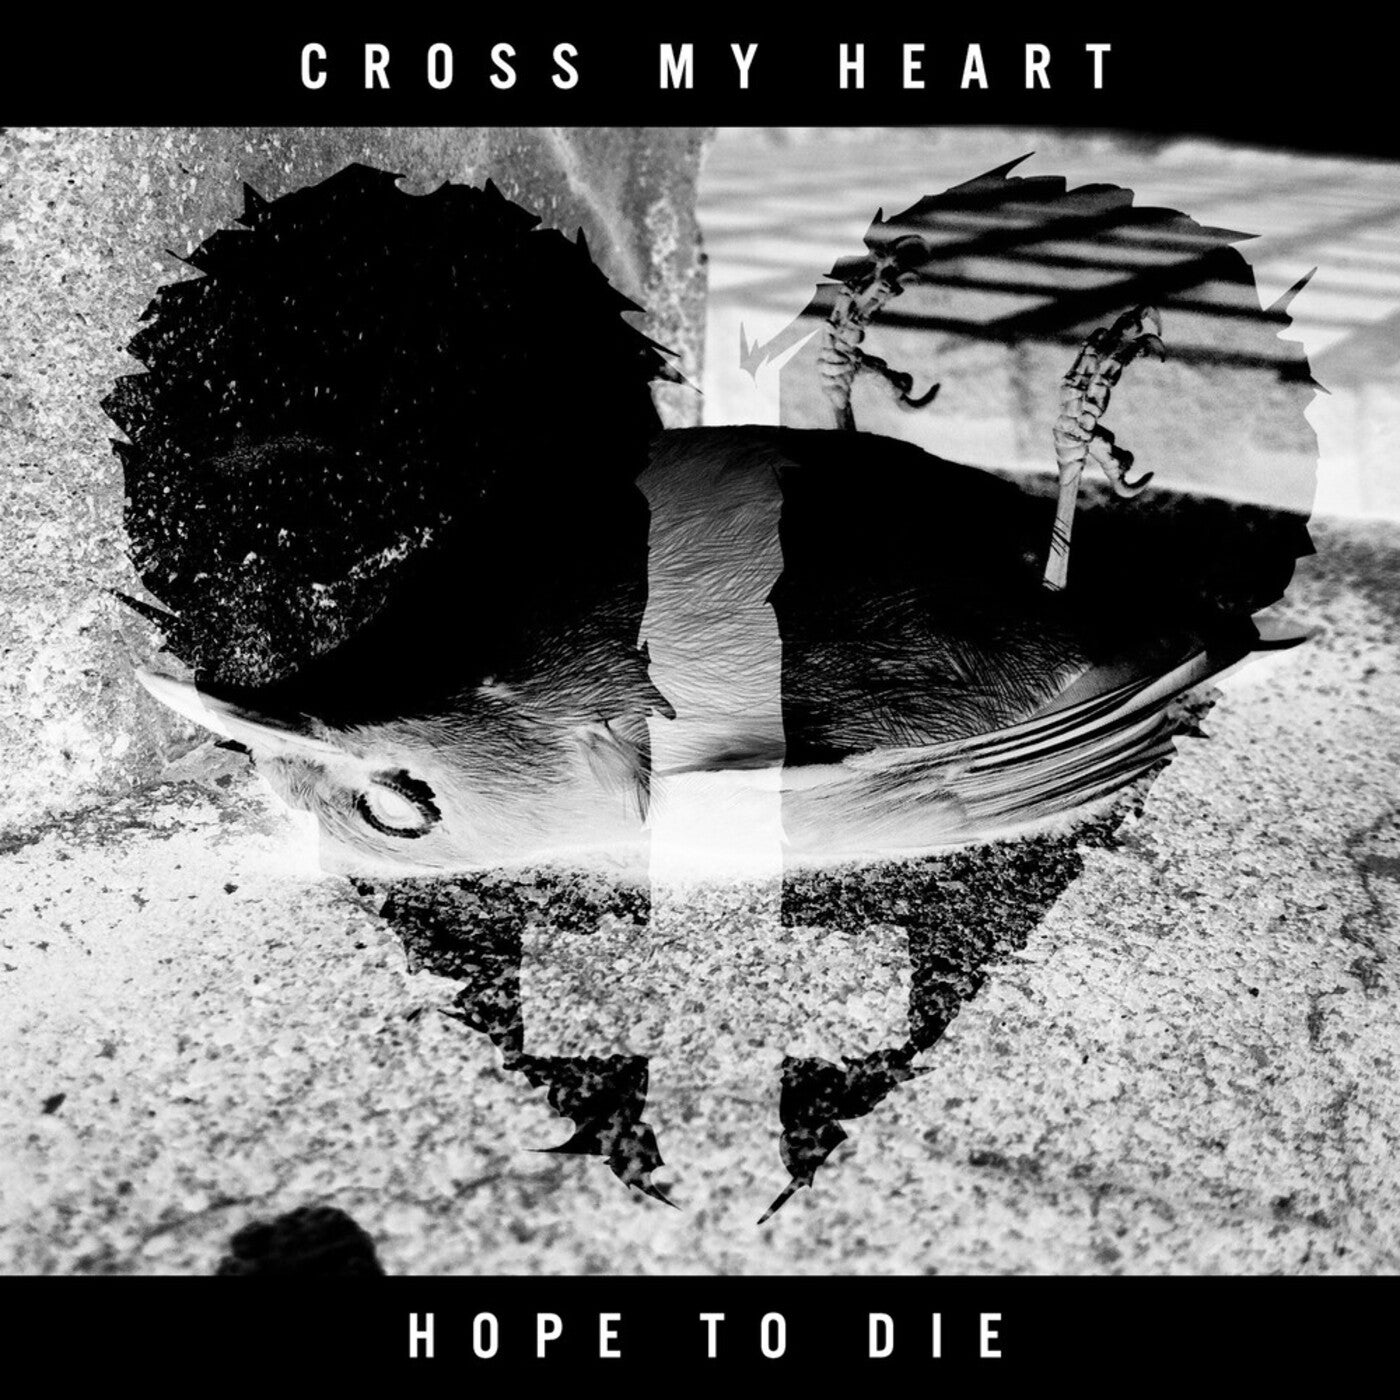 O que significa “cross my heart”?